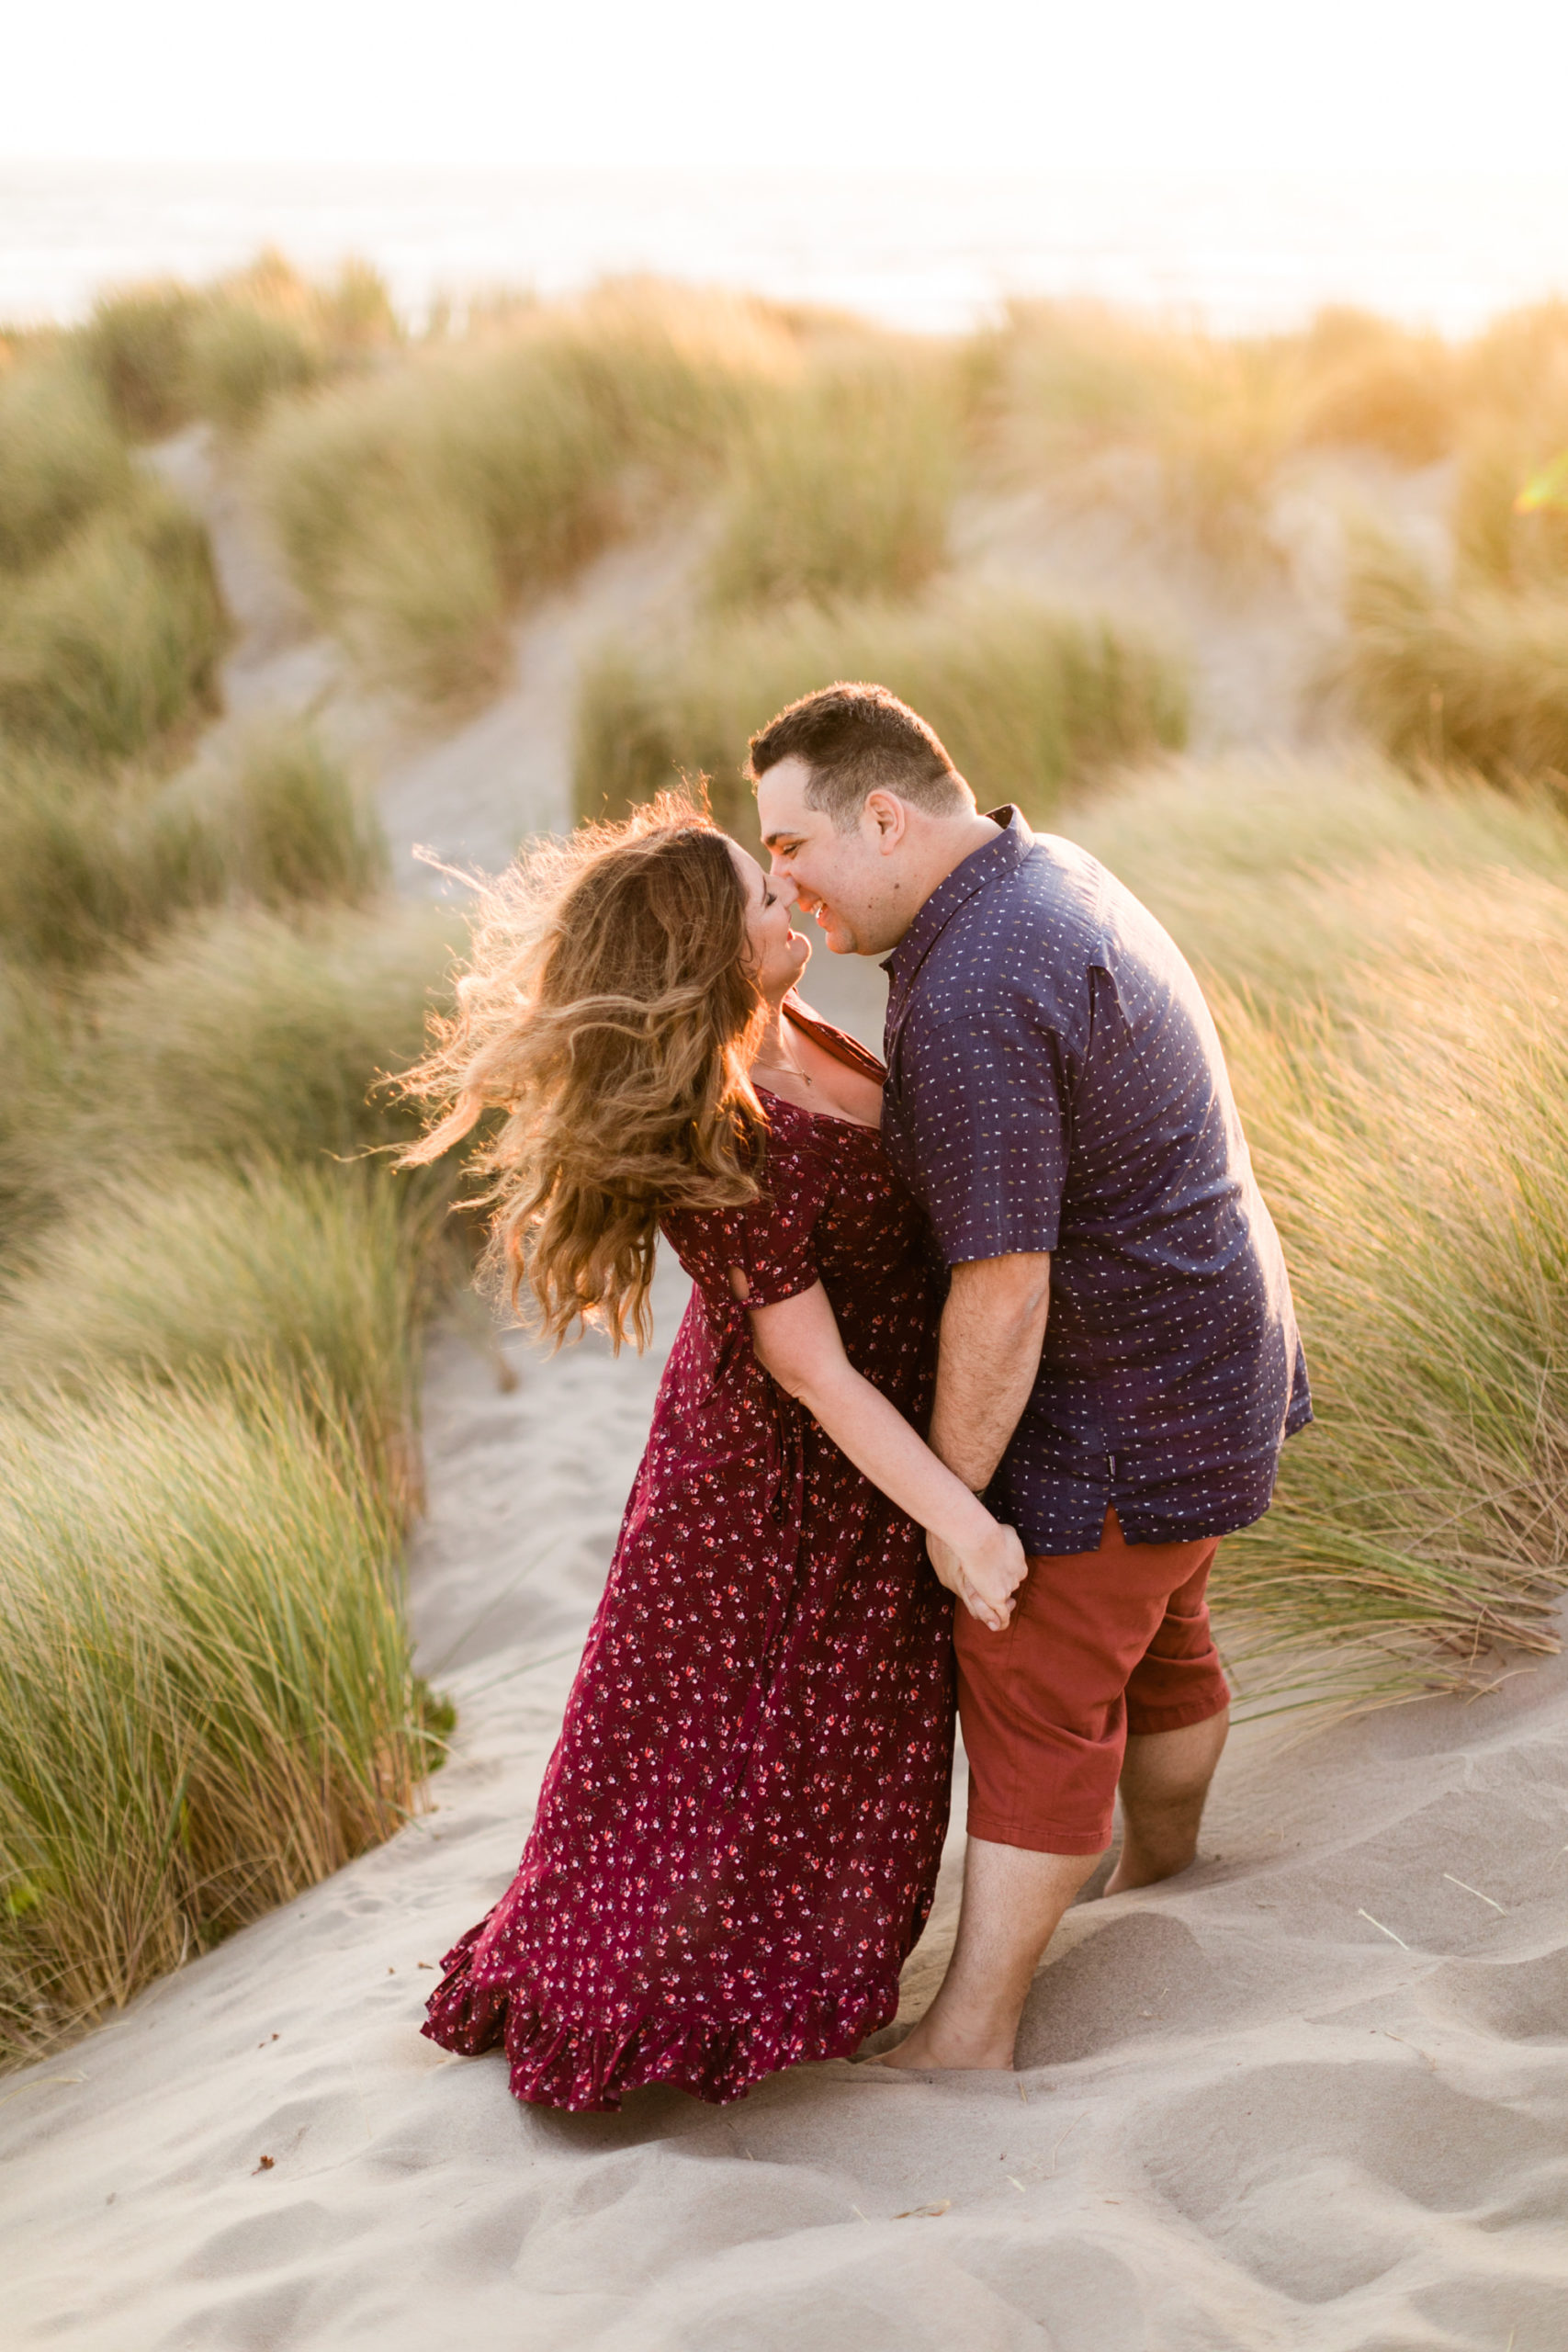 morro bay, california engagement session at sunset by Tayler Enerle